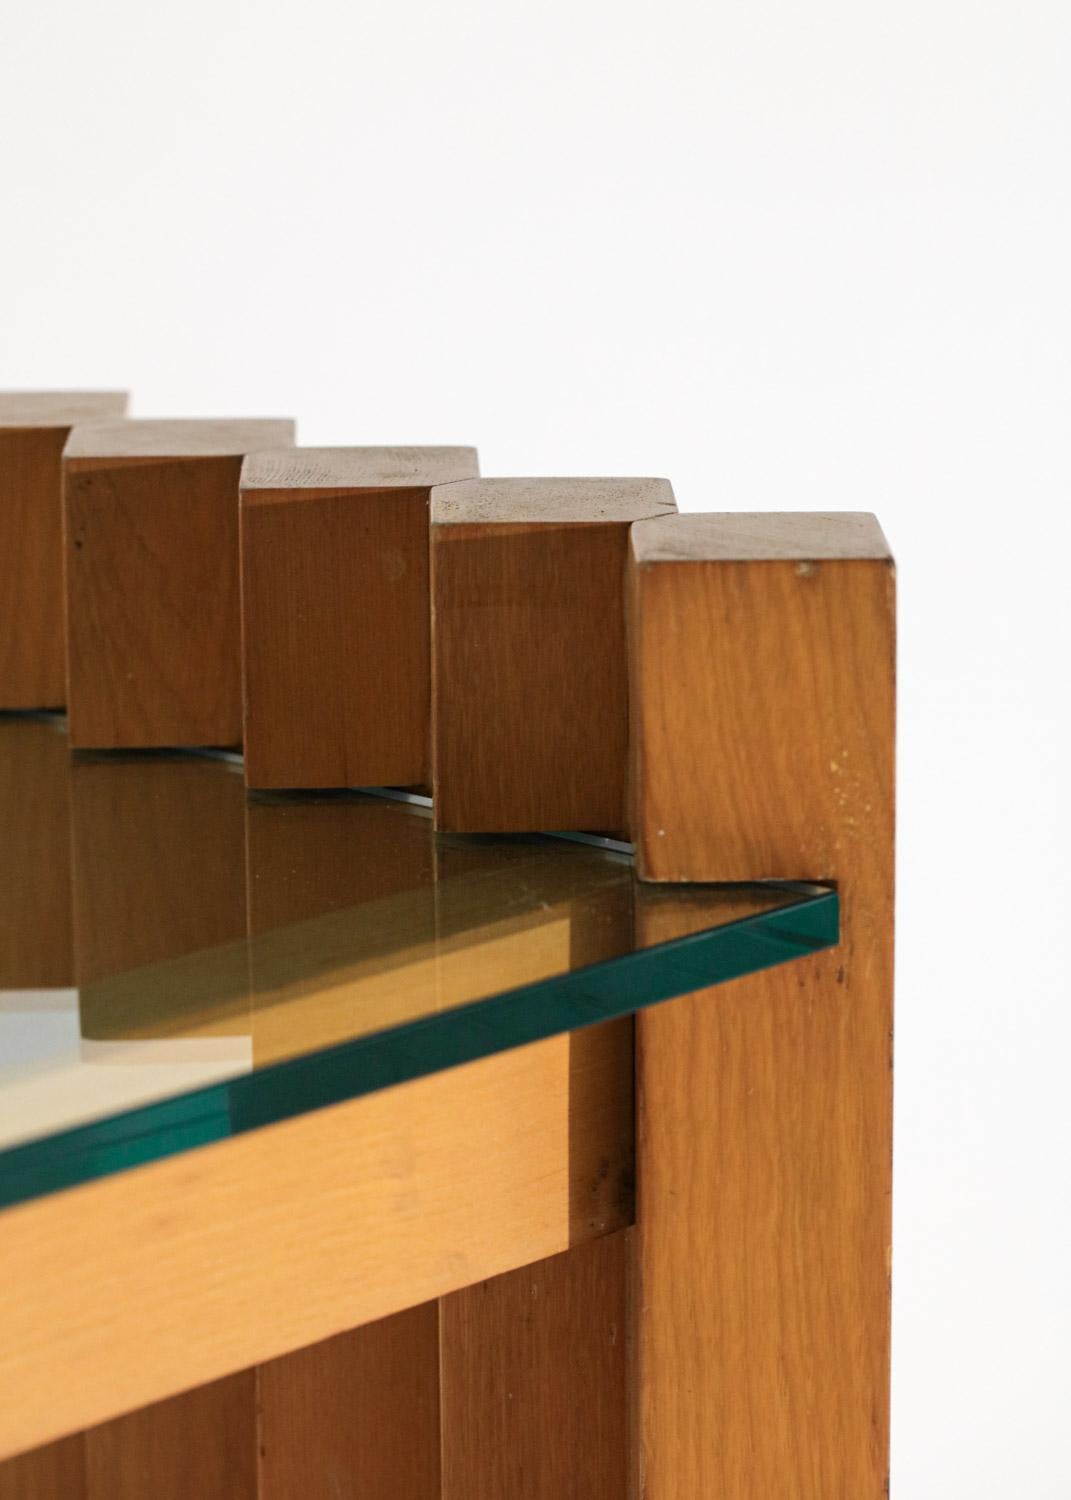 Italian Bookcase 60's / 70's Glass and Solid Wood, G343 For Sale 7